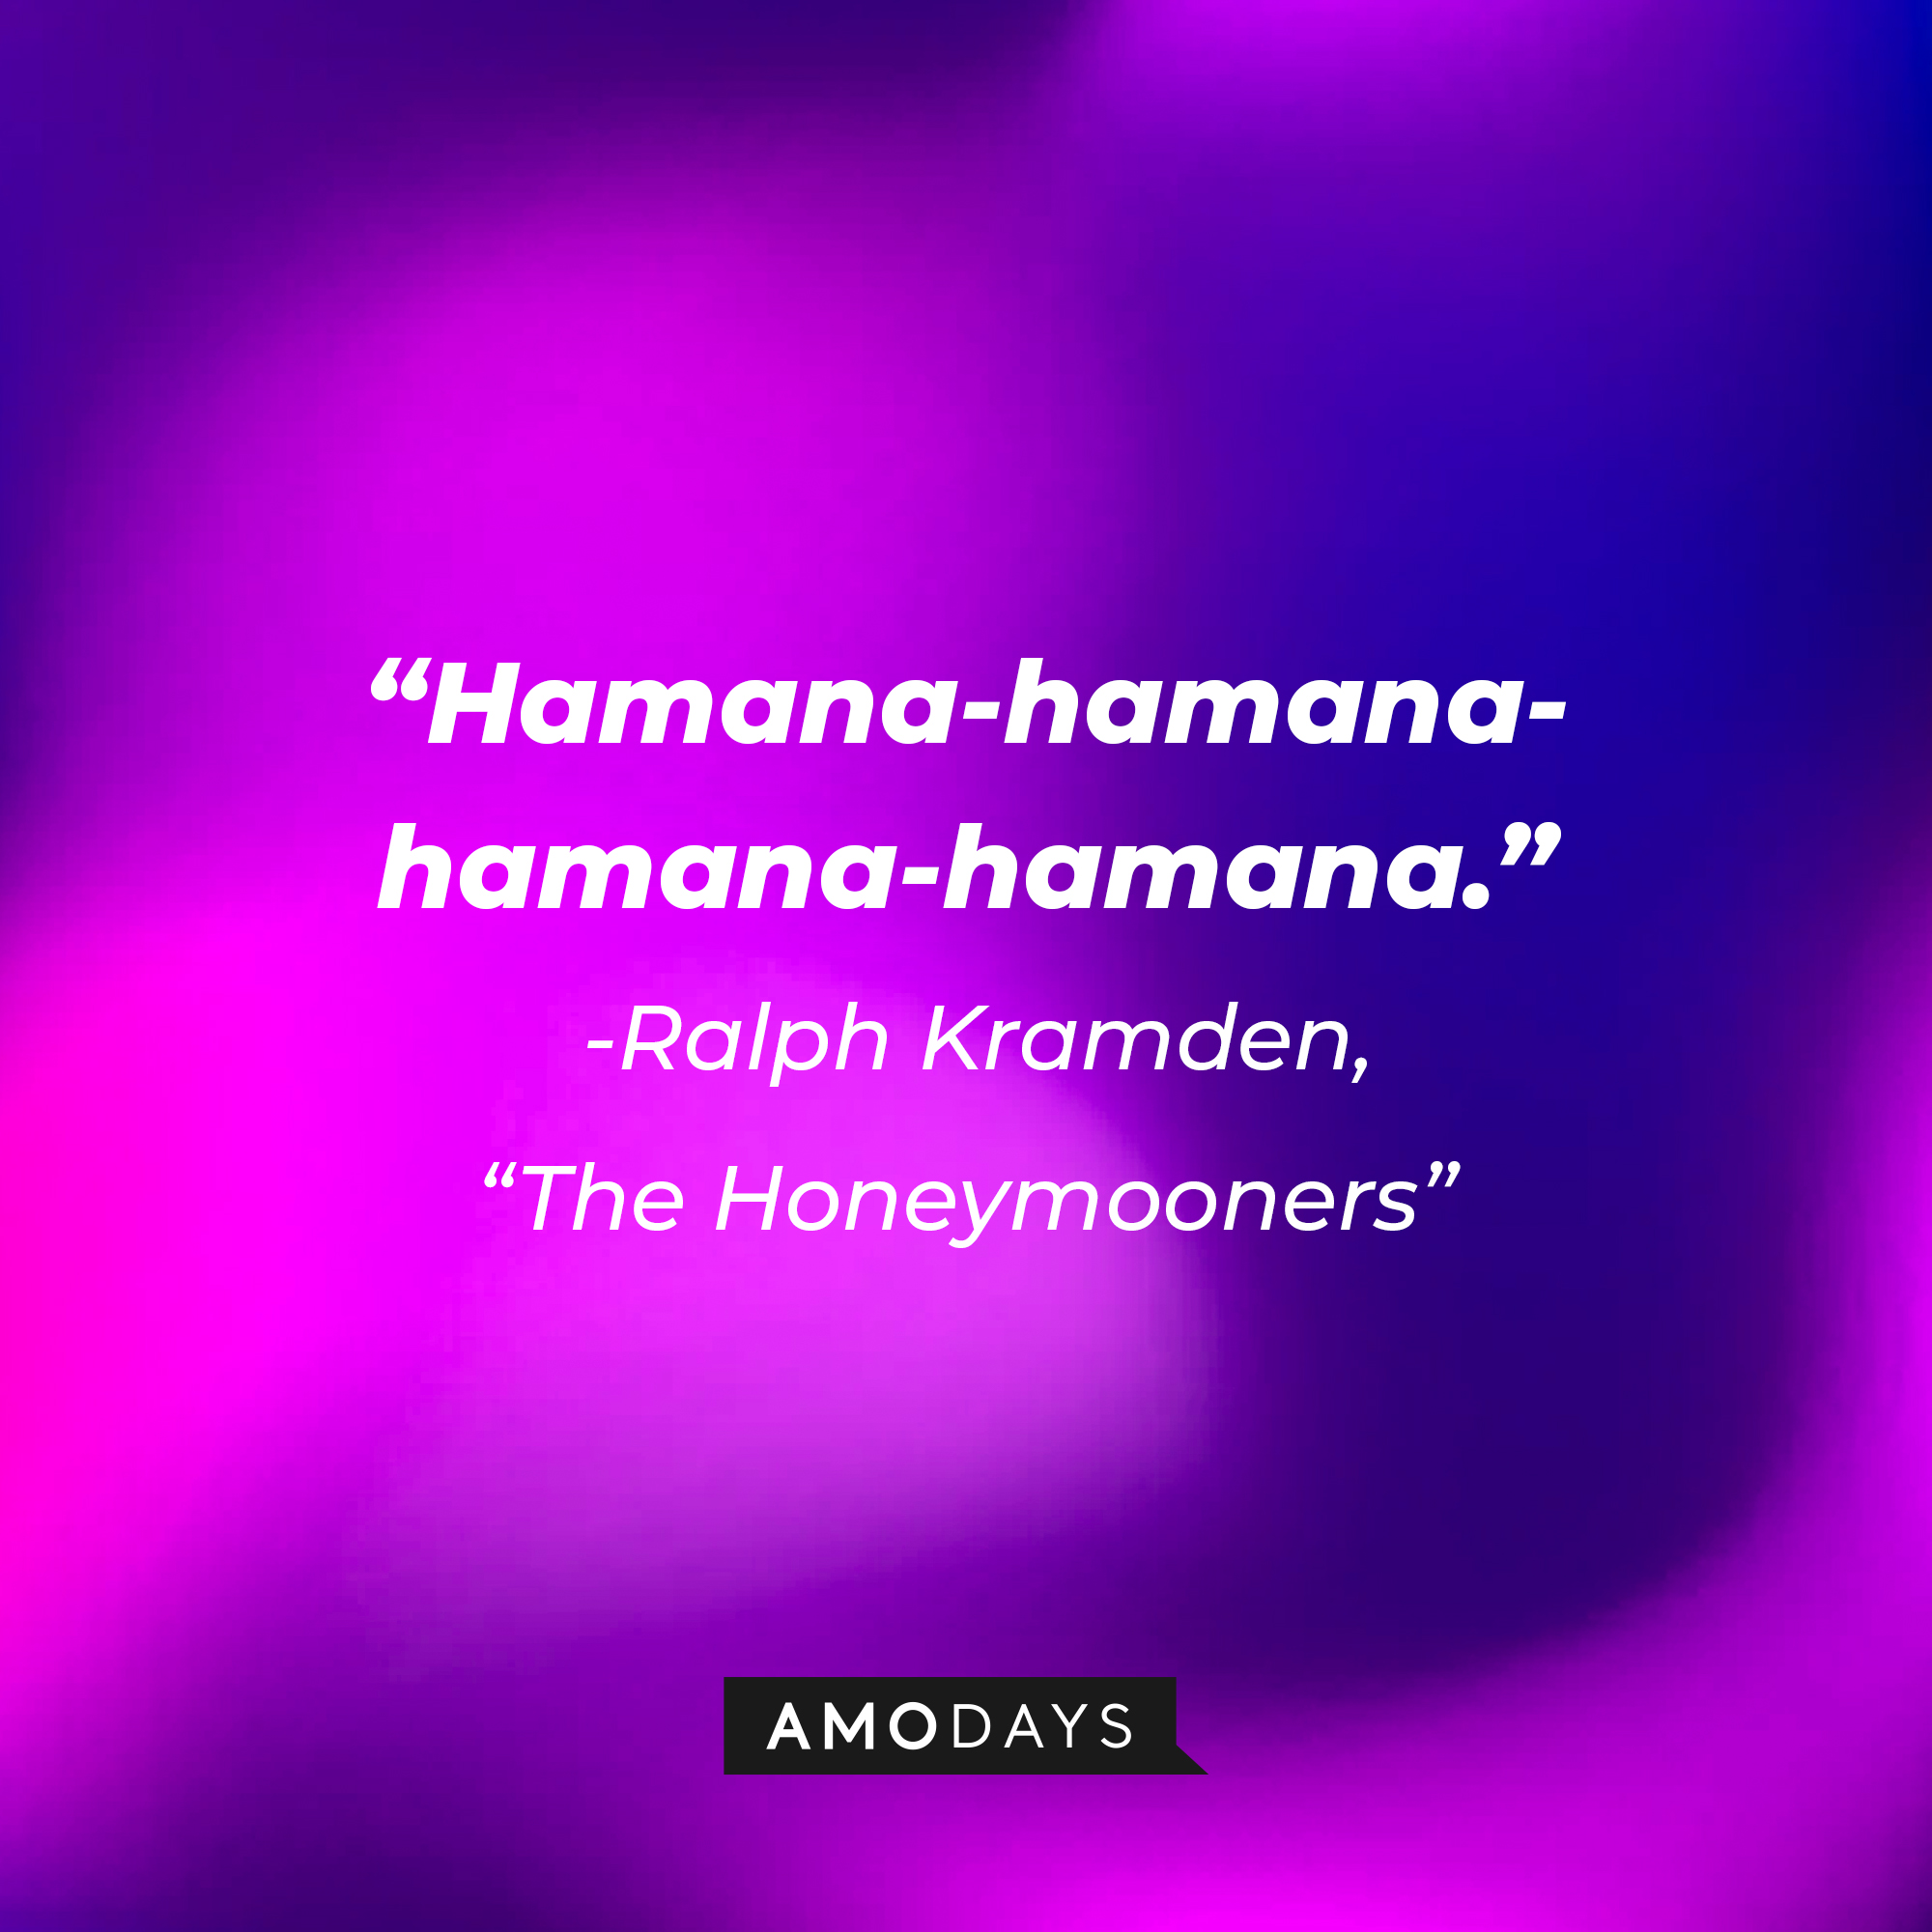 A quote from "The Honeymooners" star Ralph Kramden: "Hamana-hamana-hamana-hamana." | Source: AmoDays